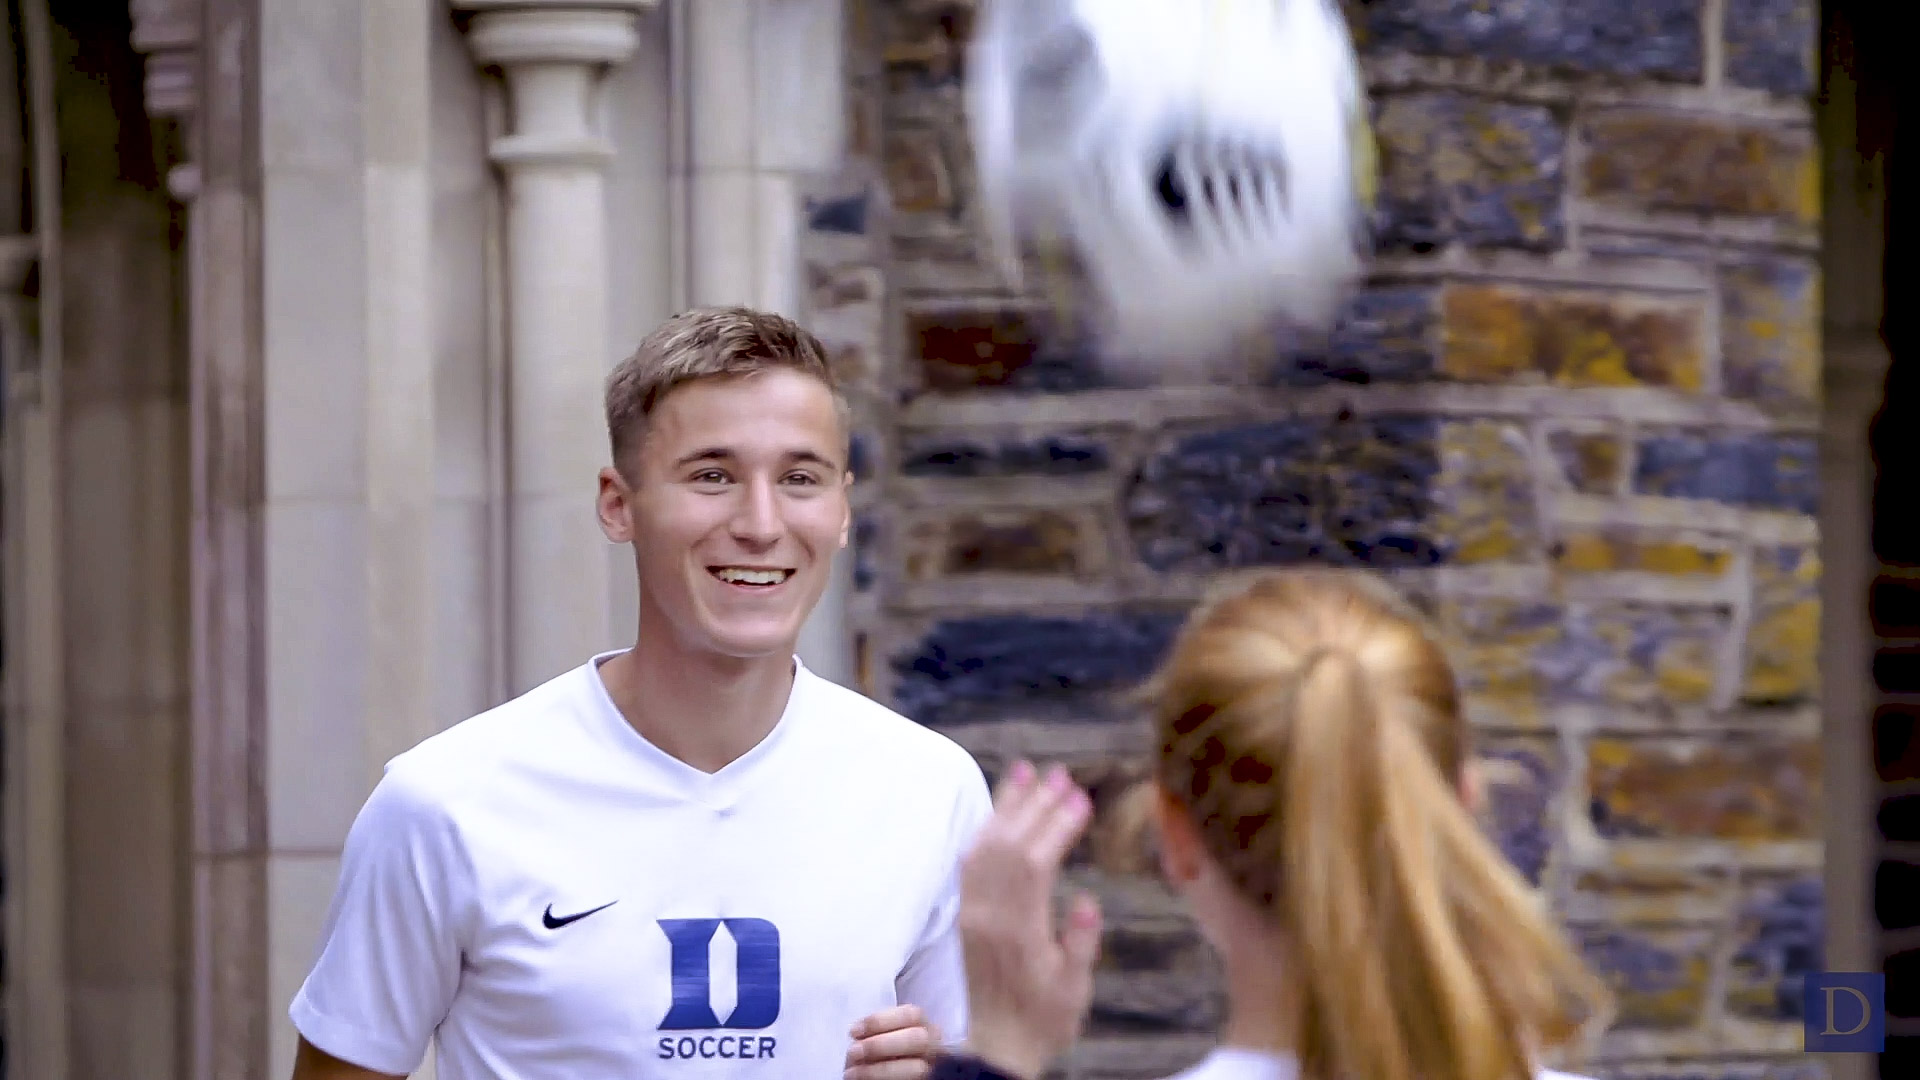 Seniors Daniel Wright and Tess Boade, from the Duke men's and women's soccer team, head each other the ball during our filming session.